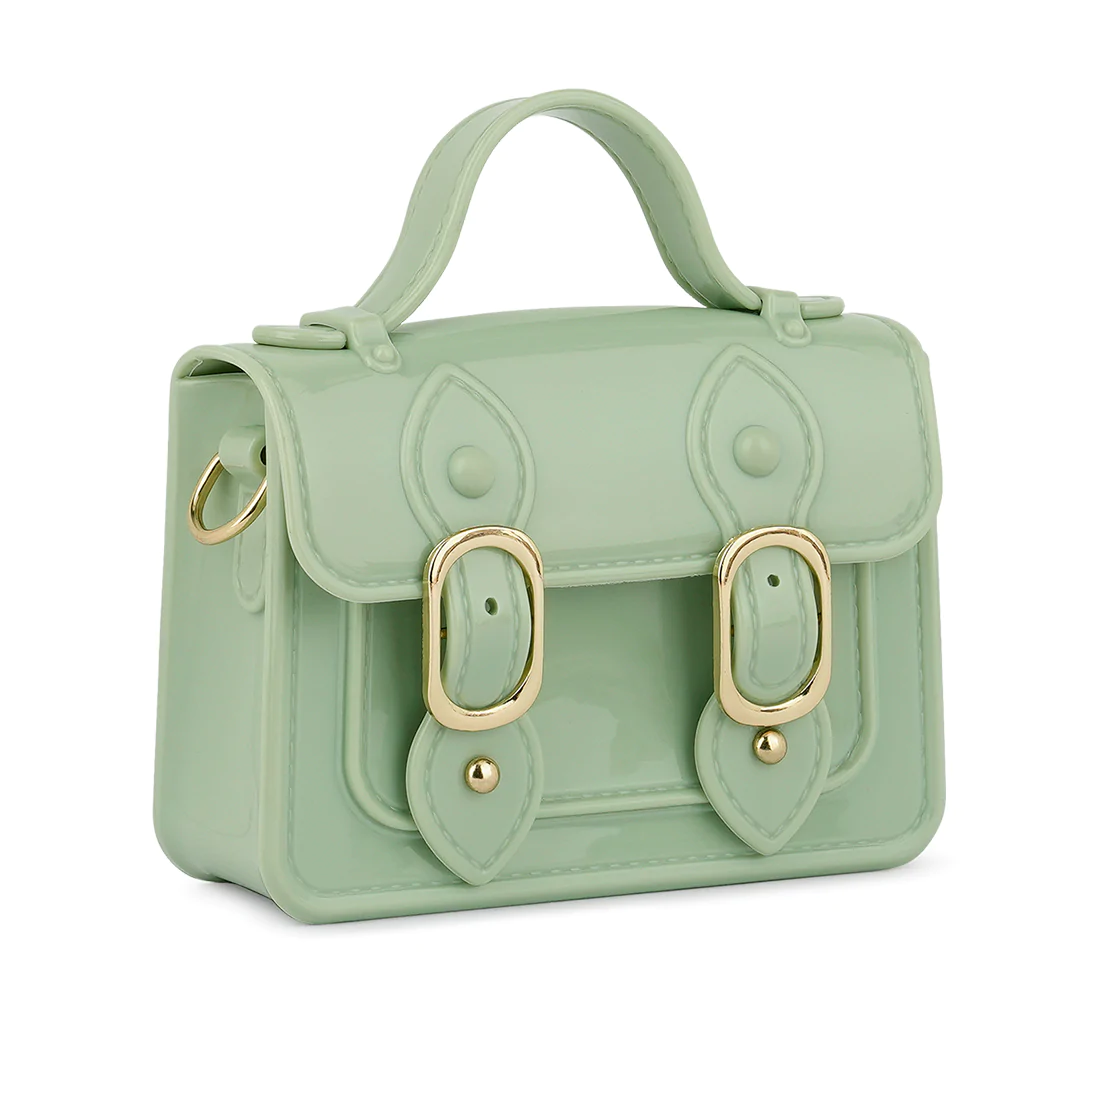 JELLY SADDLE SLING BAG IN MINT